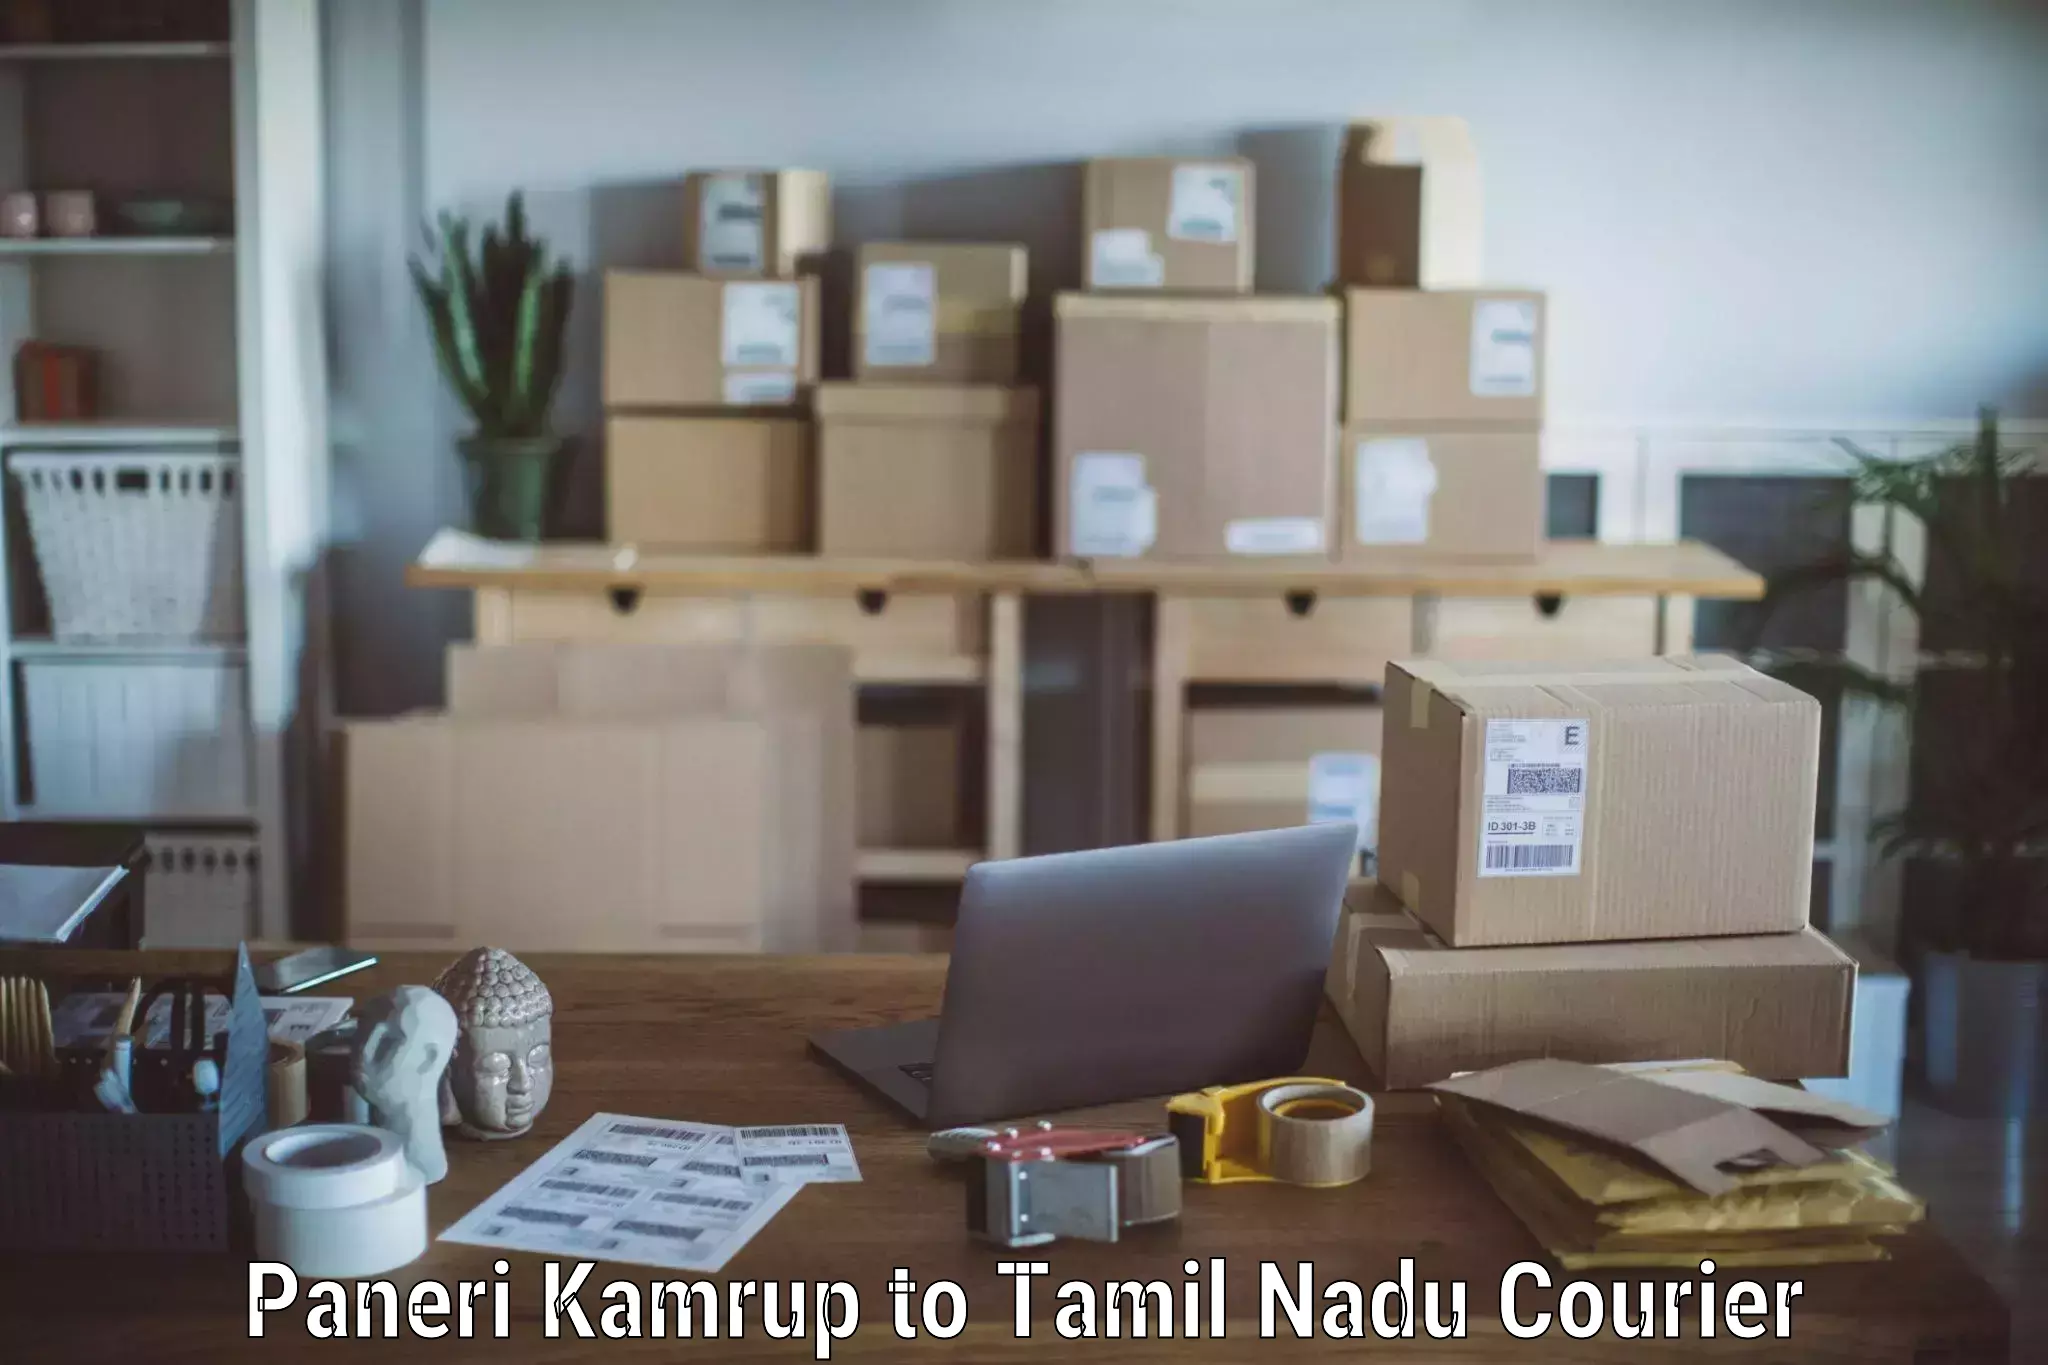 Trusted relocation experts Paneri Kamrup to Palani